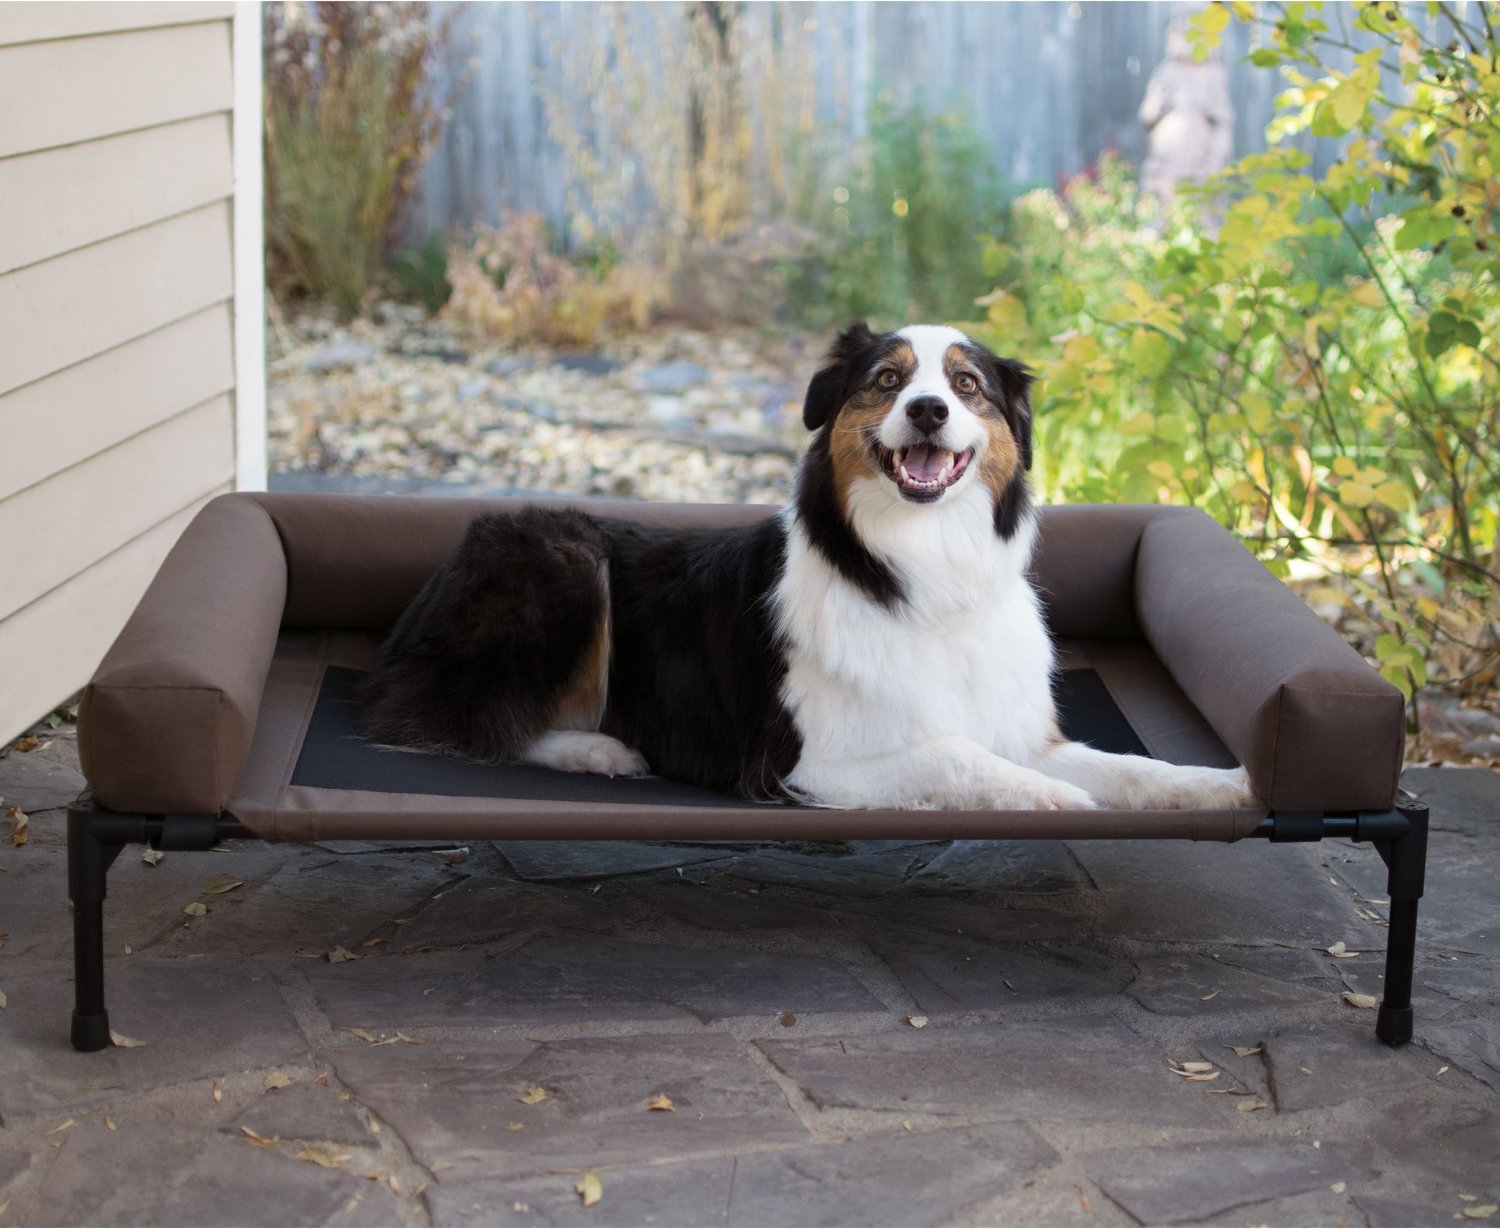 K&H Pet Products Bolster Bed